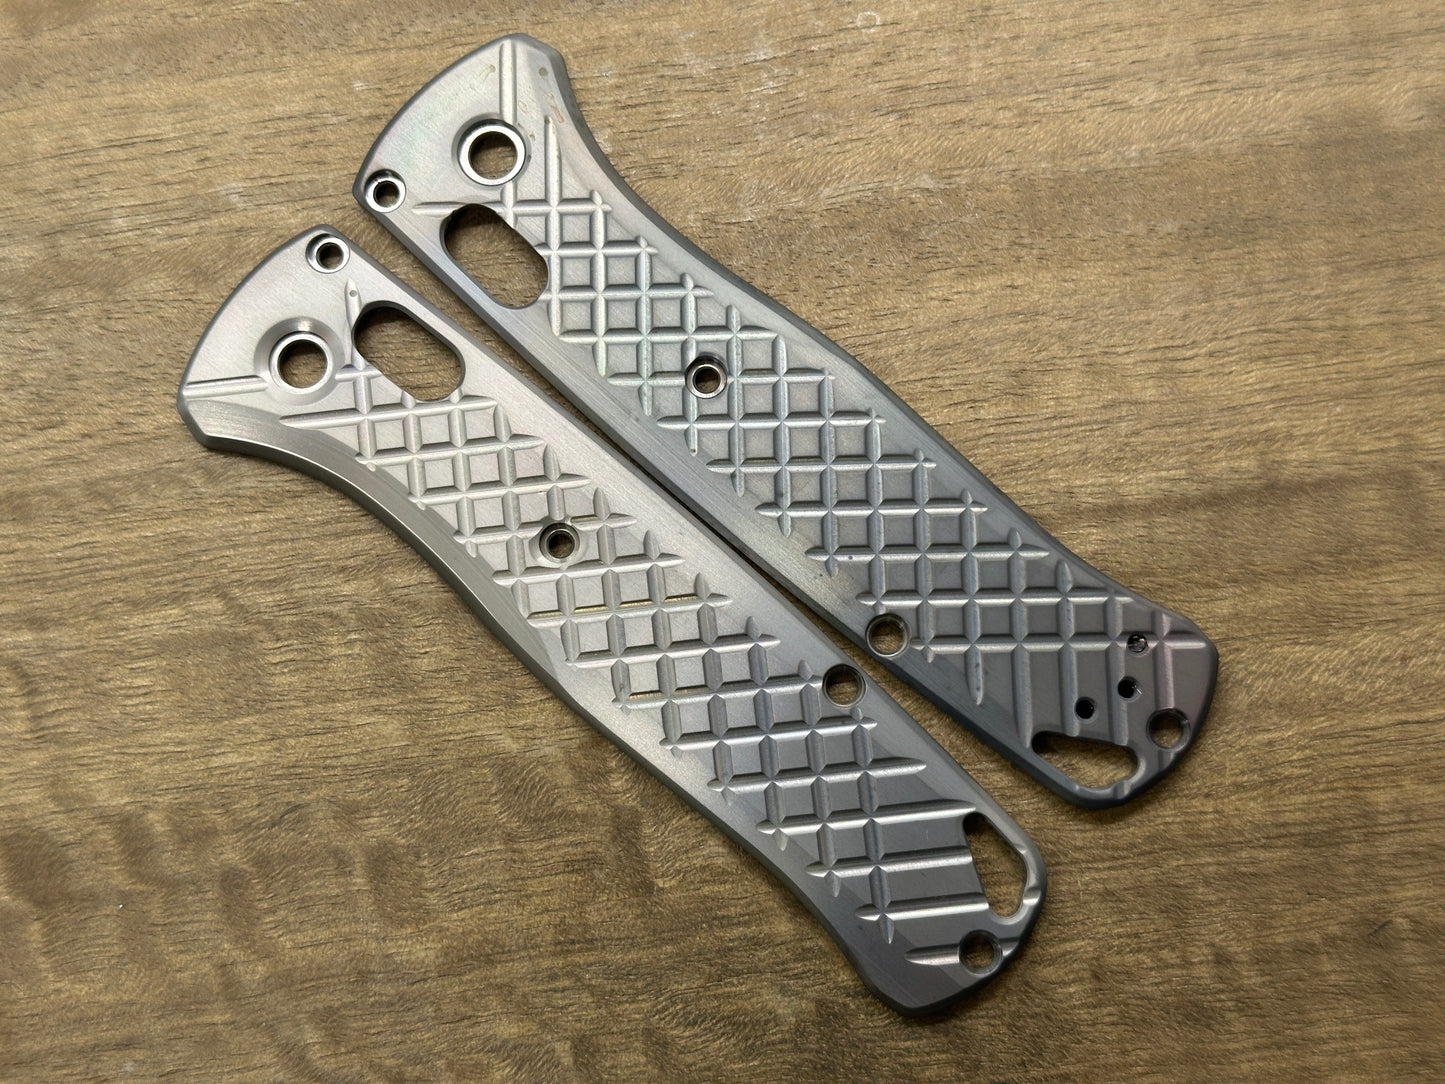 Dark-Gray FRAG cnc milled Titanium Scales for Benchmade Bugout 535